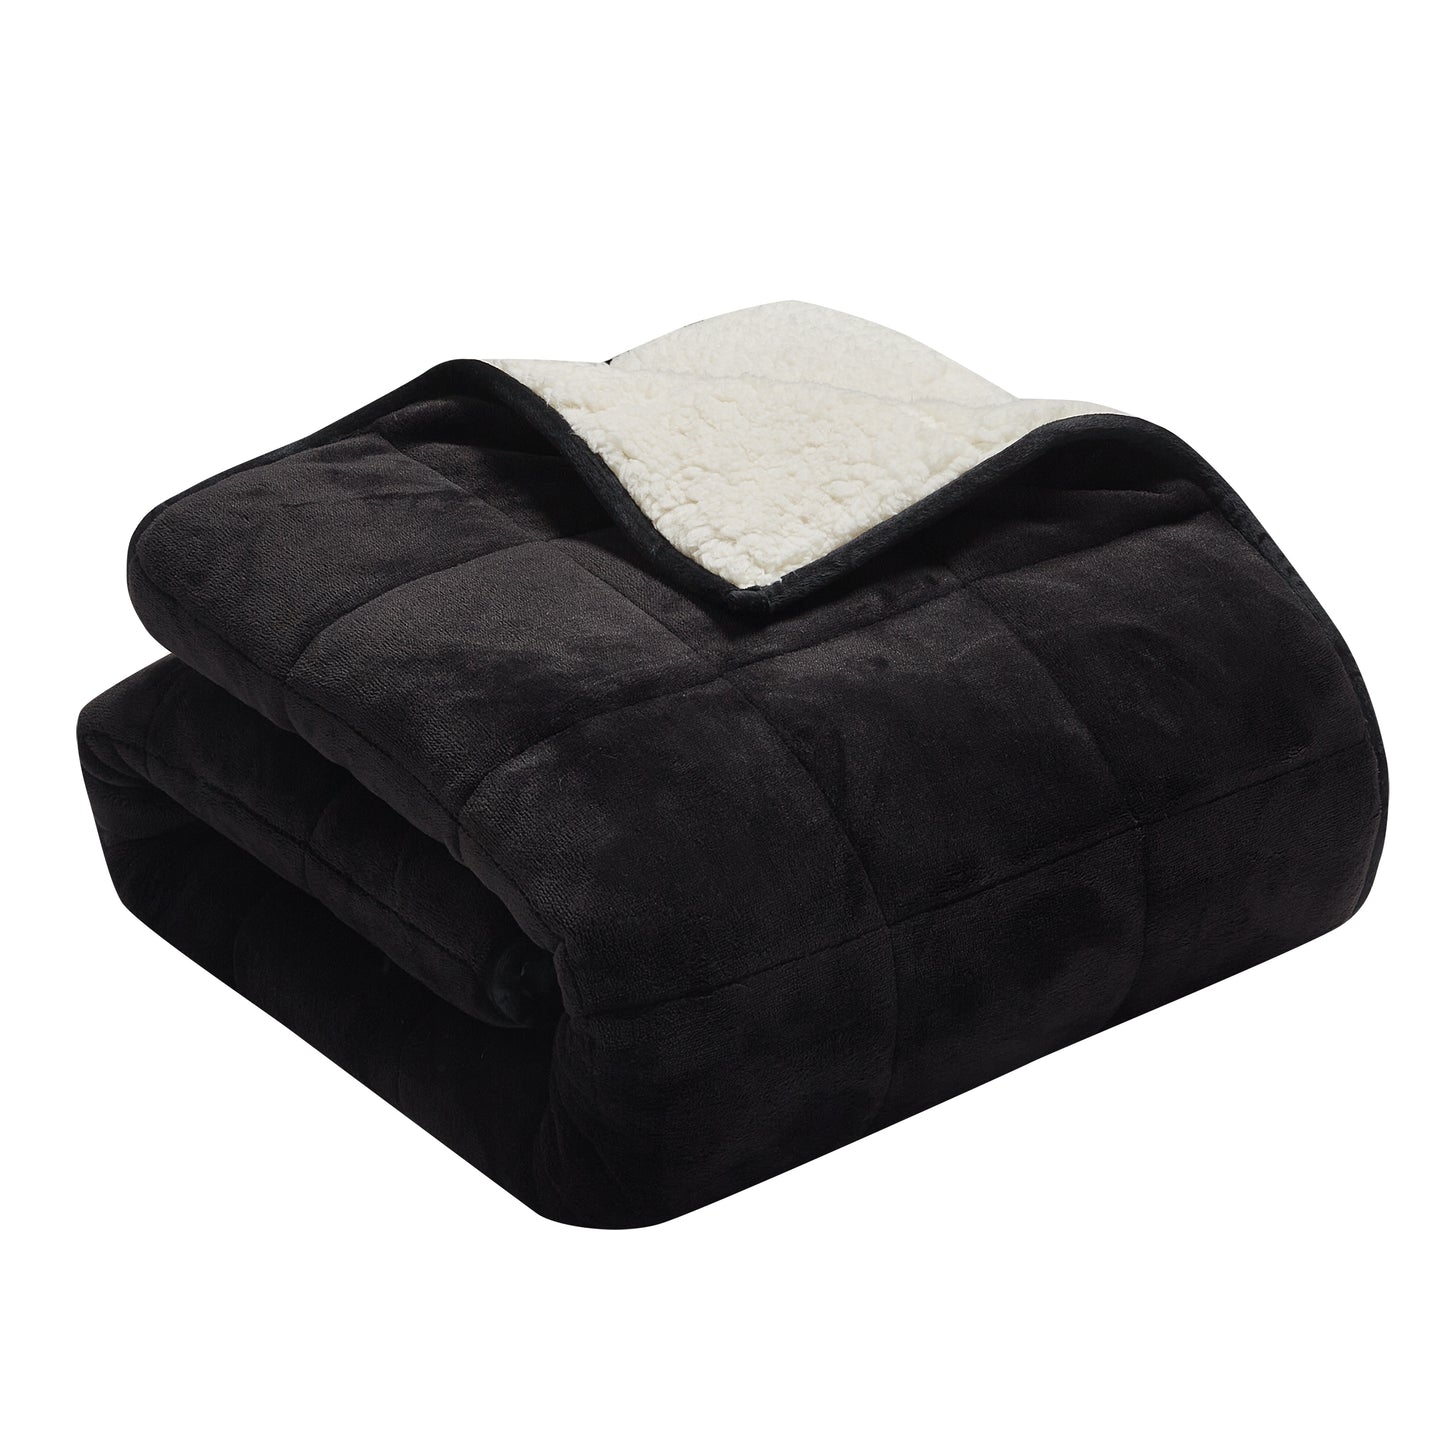 Weighted Blanket with Premium Glass Beads 10lbs - Black